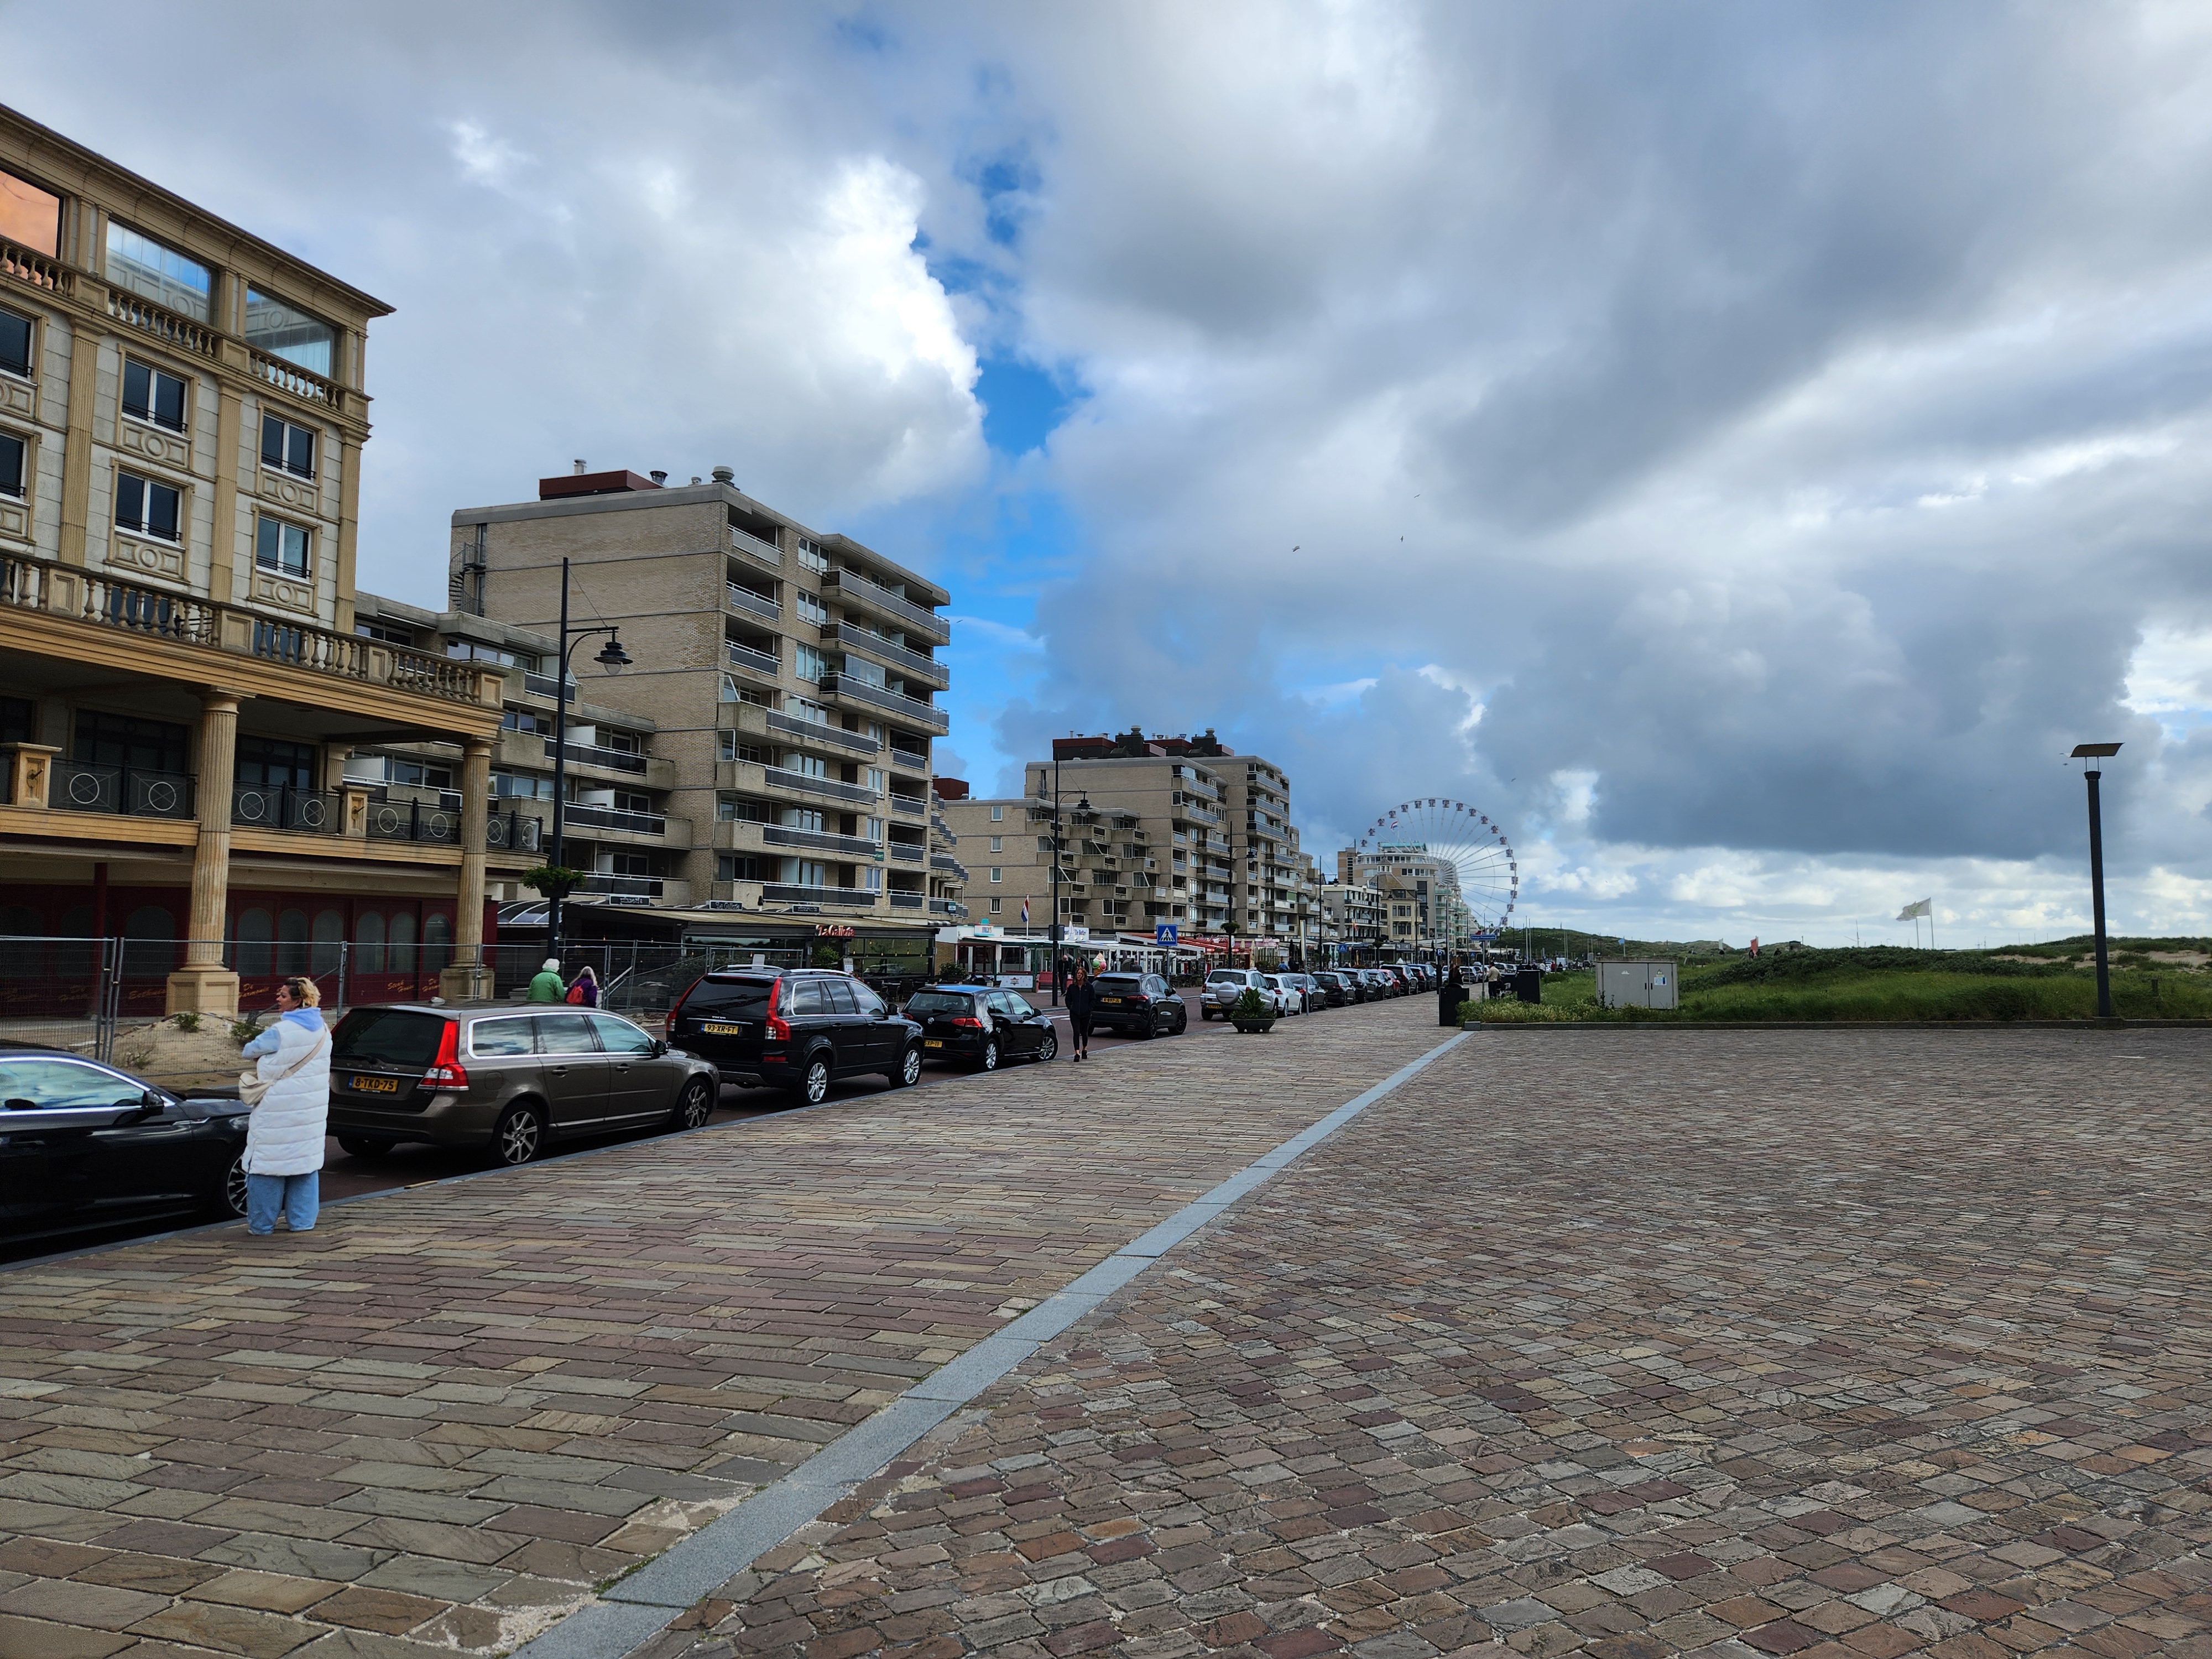 Nordwijk sea front, this is as rough as the Netherlands got, thats to say theres a gaudy romanesque hotel and some 70&rsquo;s style flats, in the background is a ferris wheel. The paved road surface is immaculate